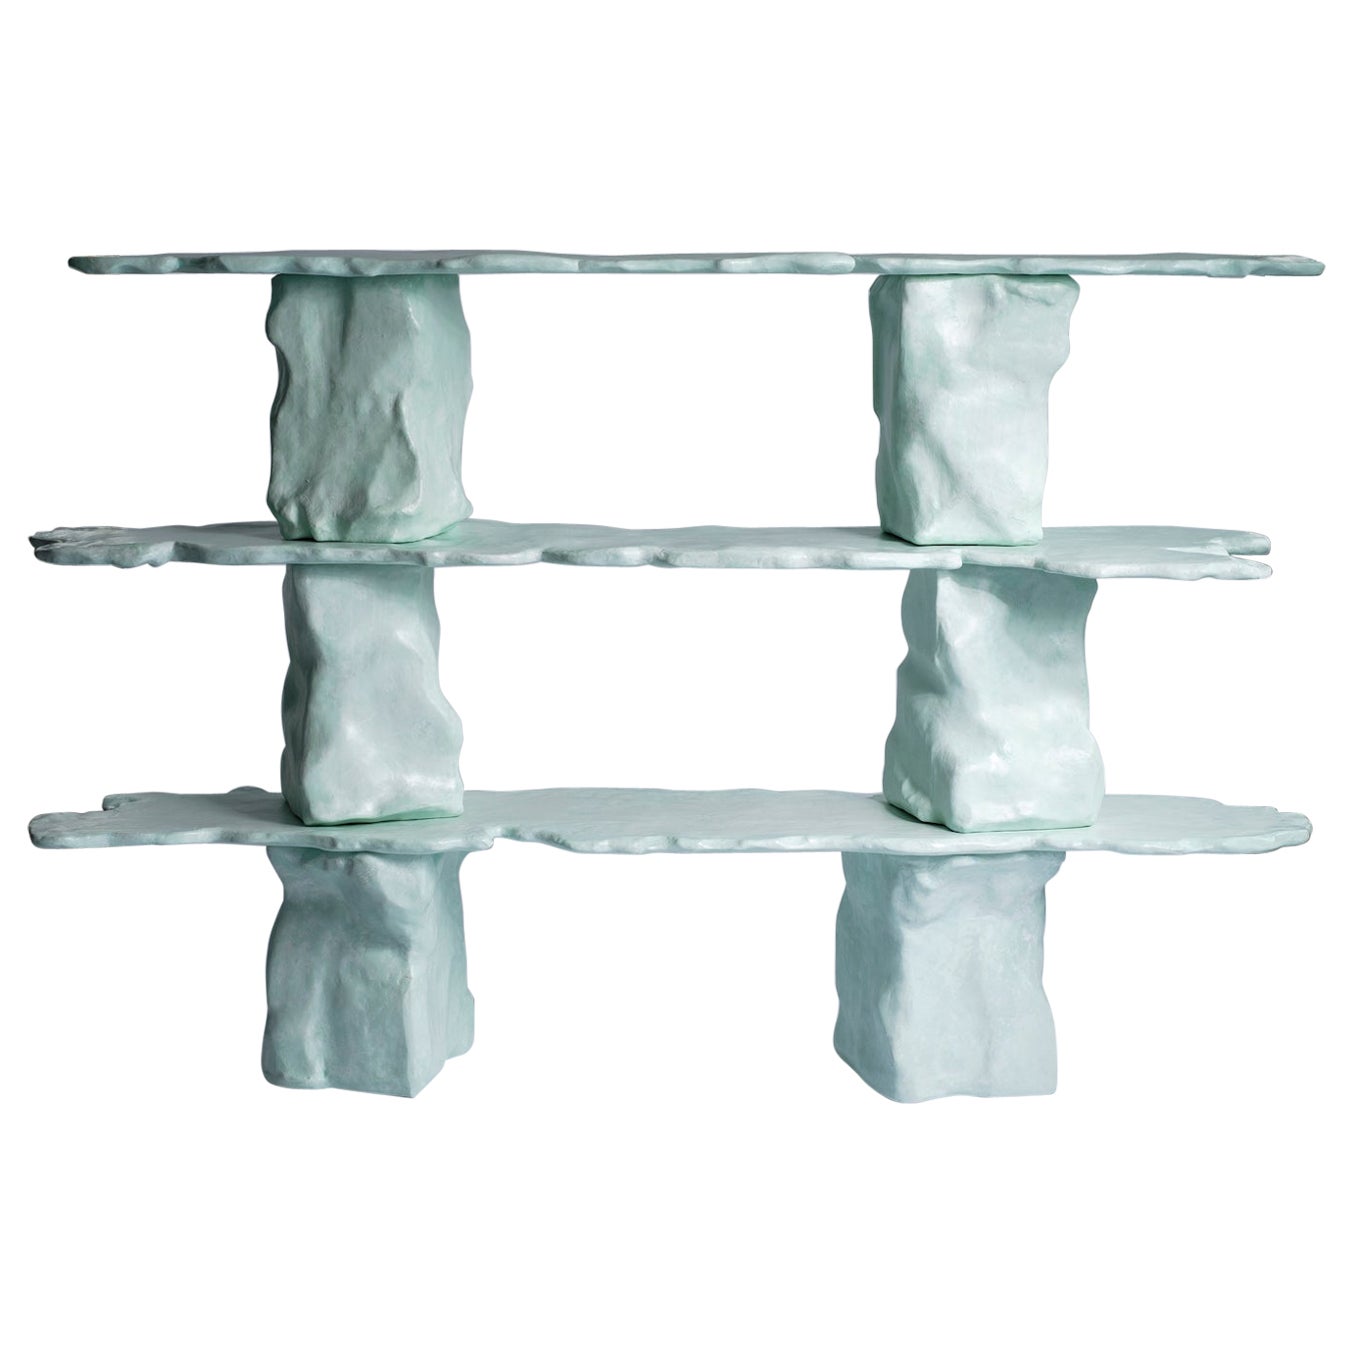 Contemporary Modular Shelf "Object 28-29" by Gert Wessels For Sale